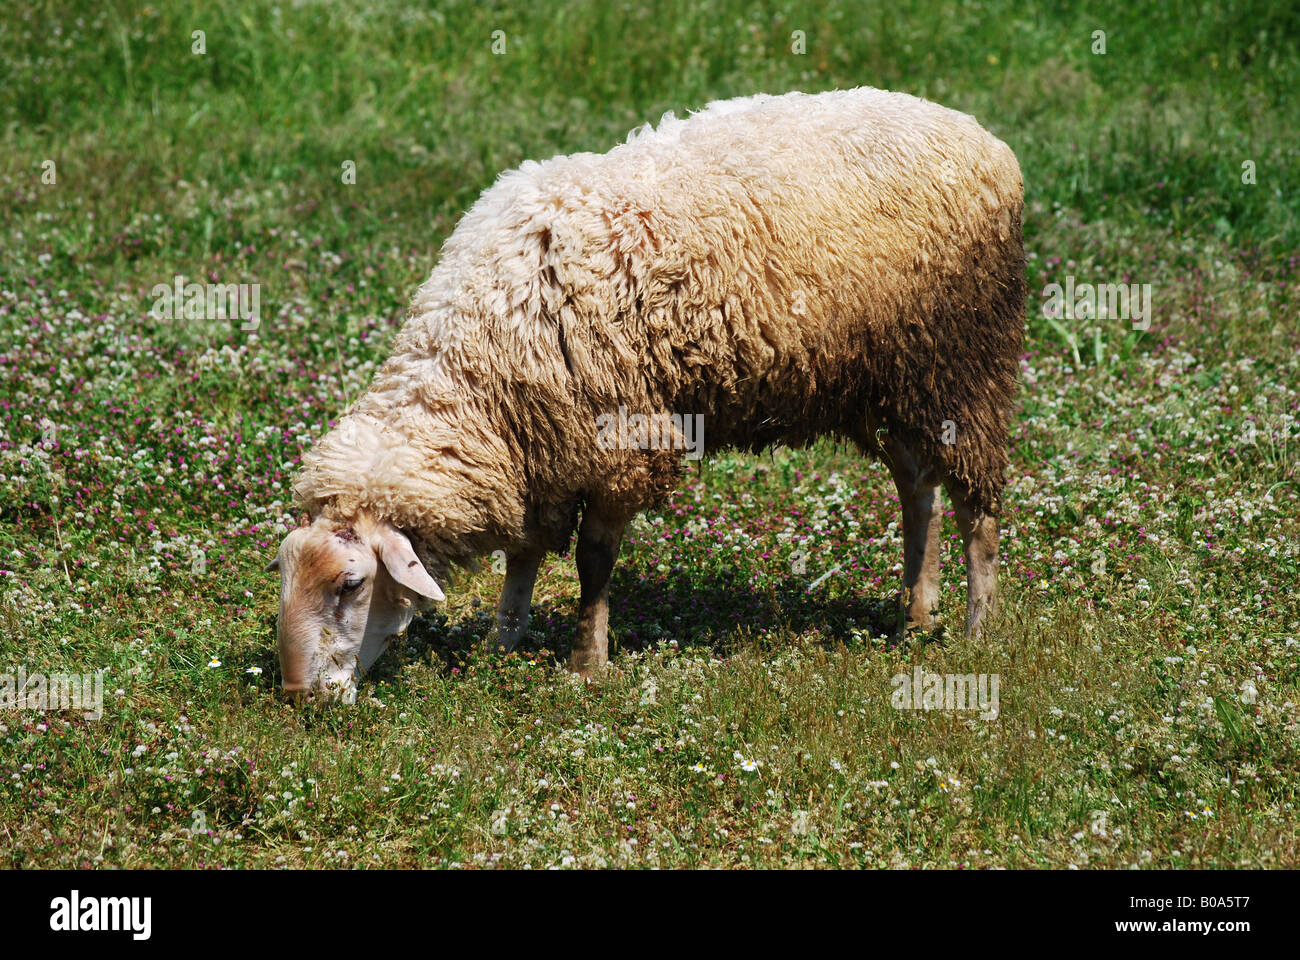 A domestic sheep eating in a field Stock Photo